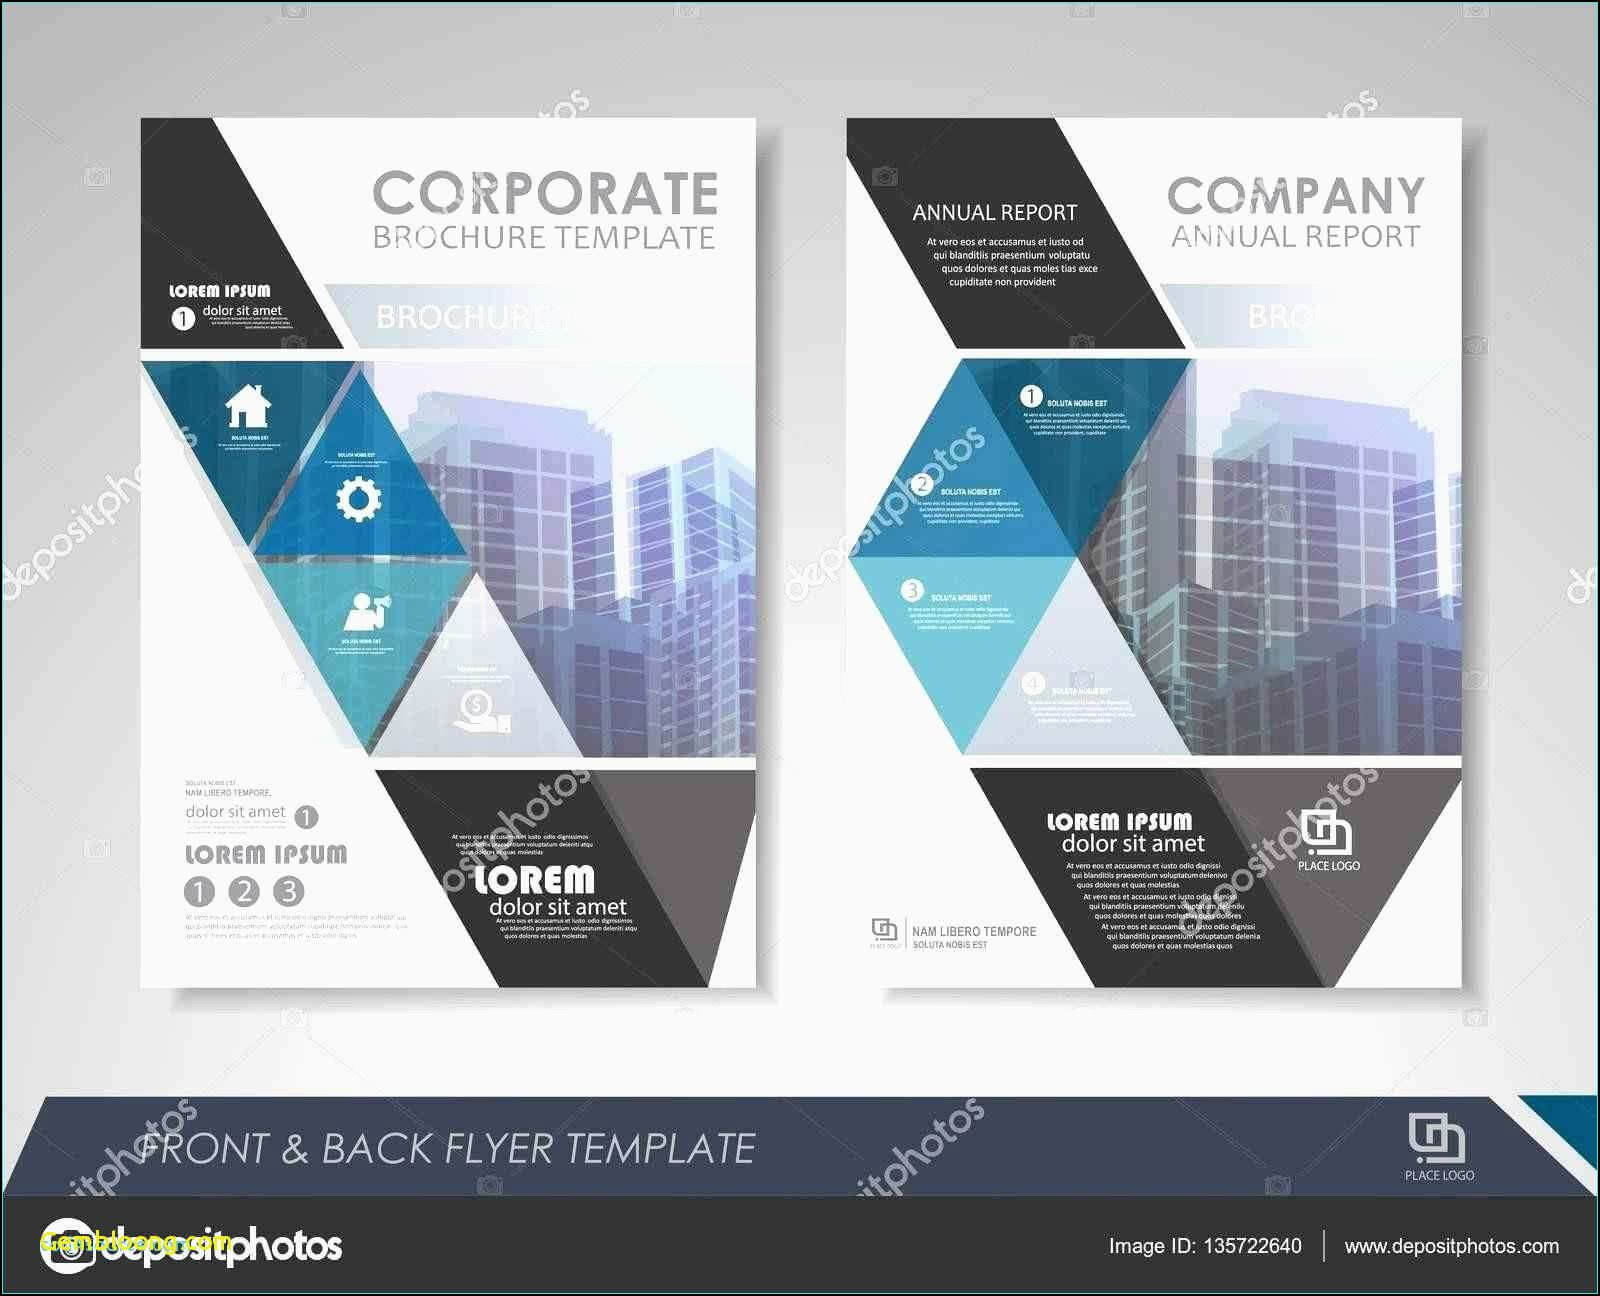 004 In Design Flyer Template Unbelievable Ideas Free Pertaining To Indesign Templates Free Download Brochure